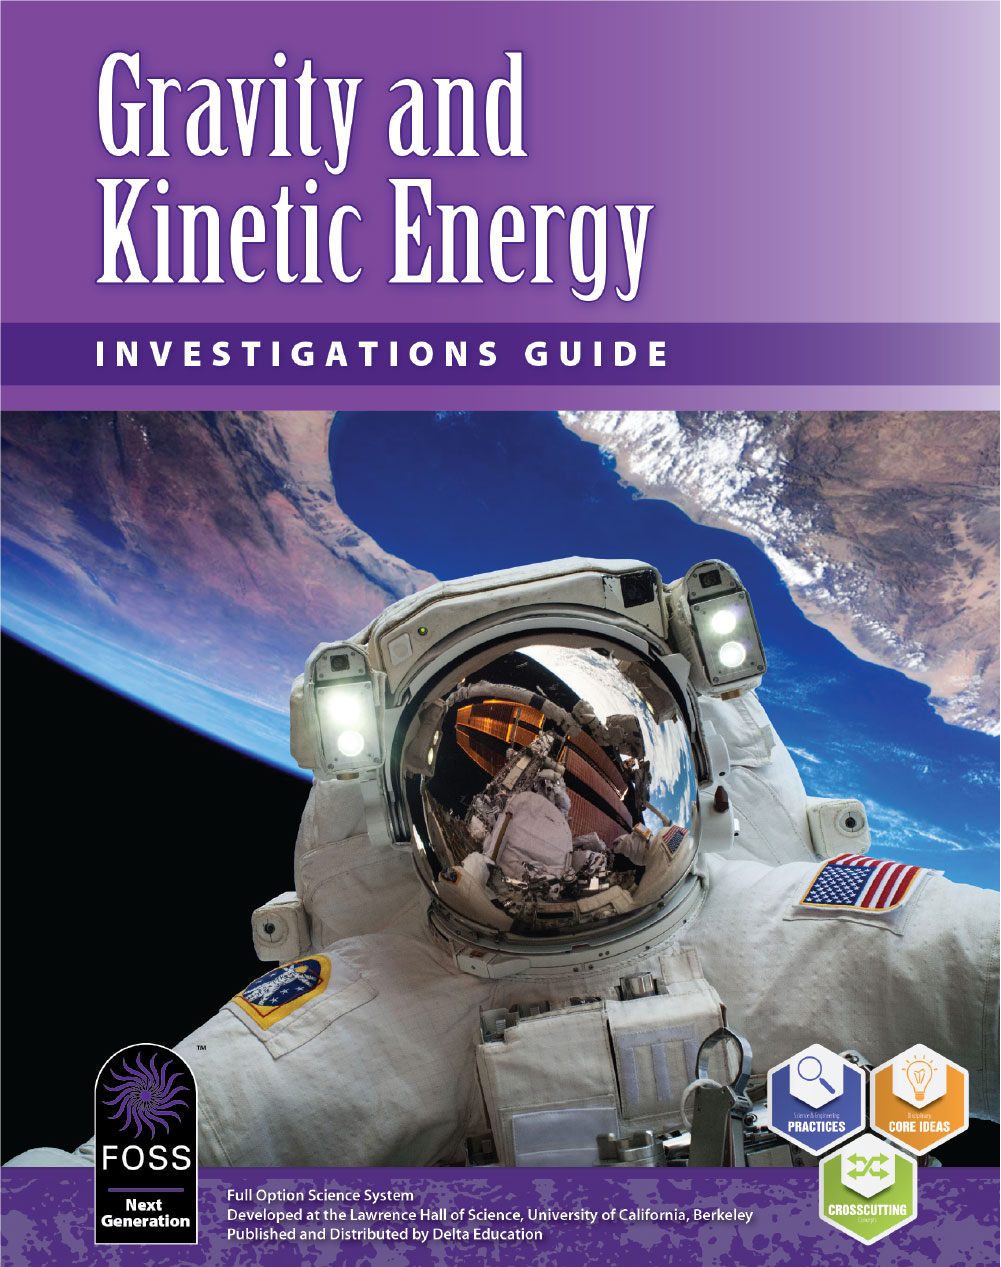 Gravity and Kinetic Energy Investigations Guide